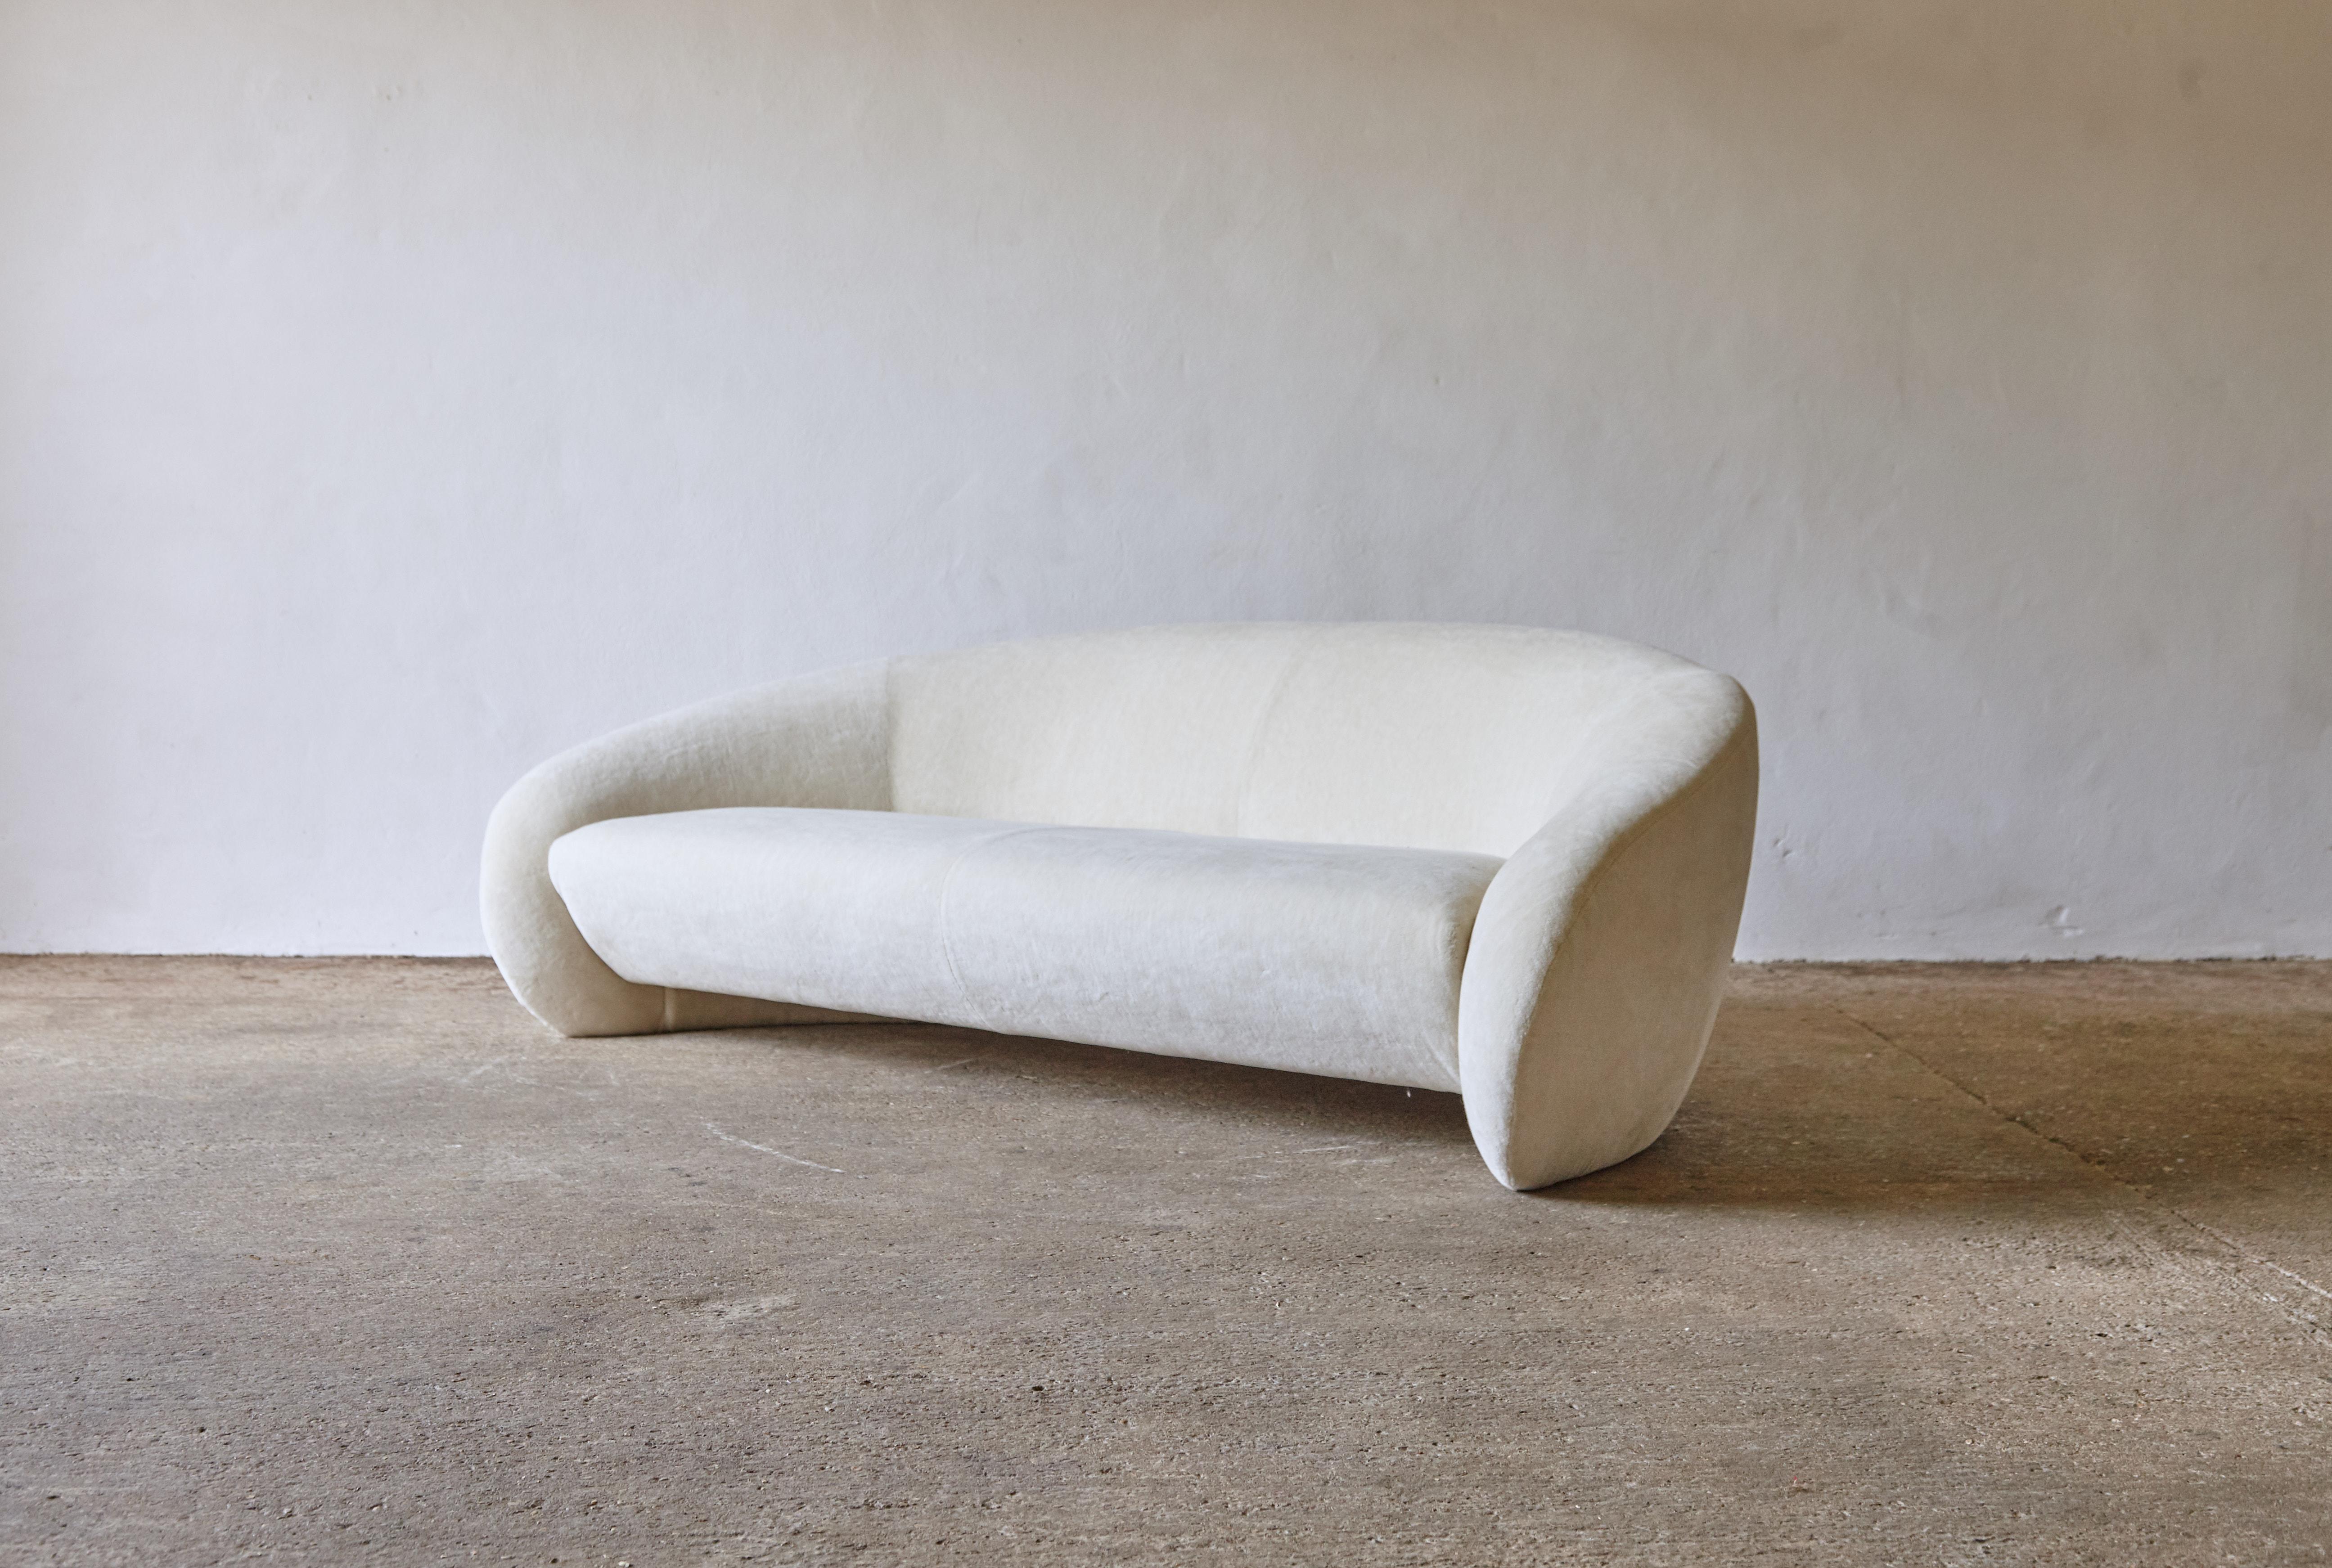 A superb rare Italian curved sofa or organic form, late 1970s-early 1980s, Italy. Newly reupholstered in thick cream alpaca velvet.
  



Please note: Prices do not include VAT. VAT may be applied depending on the ship-to location.